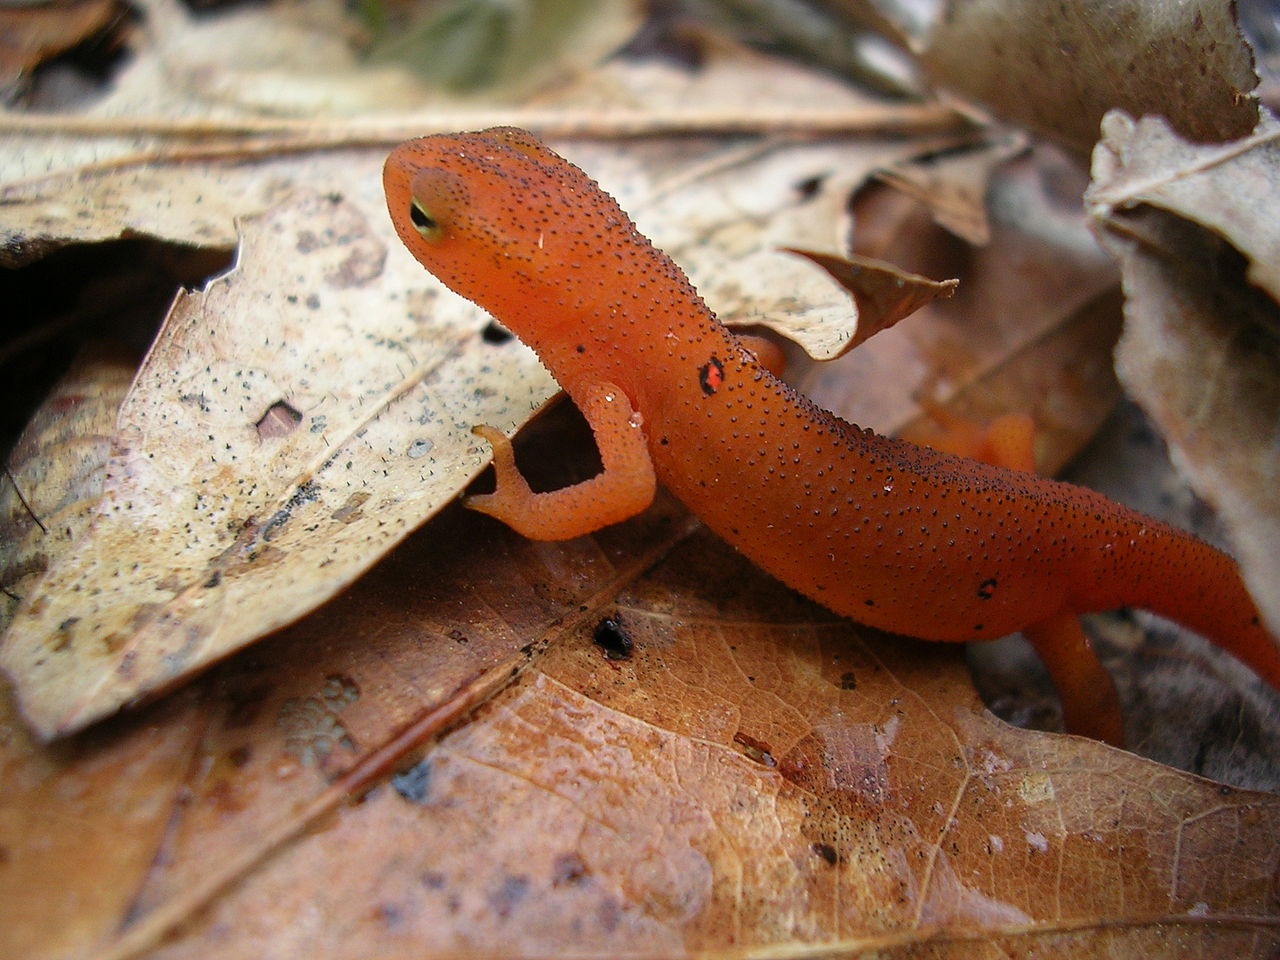 Triton vert à points rouges - Notophthalmus viridescens - <a href='https://commons.wikimedia.org/wiki/File:Red_spotted_newt_01.JPG' title='via Wikimedia Commons'>J. Carmichael (Tevonic (talk) 02:17, 7 July 2009 (UTC))</a> / Public domain - BioObs